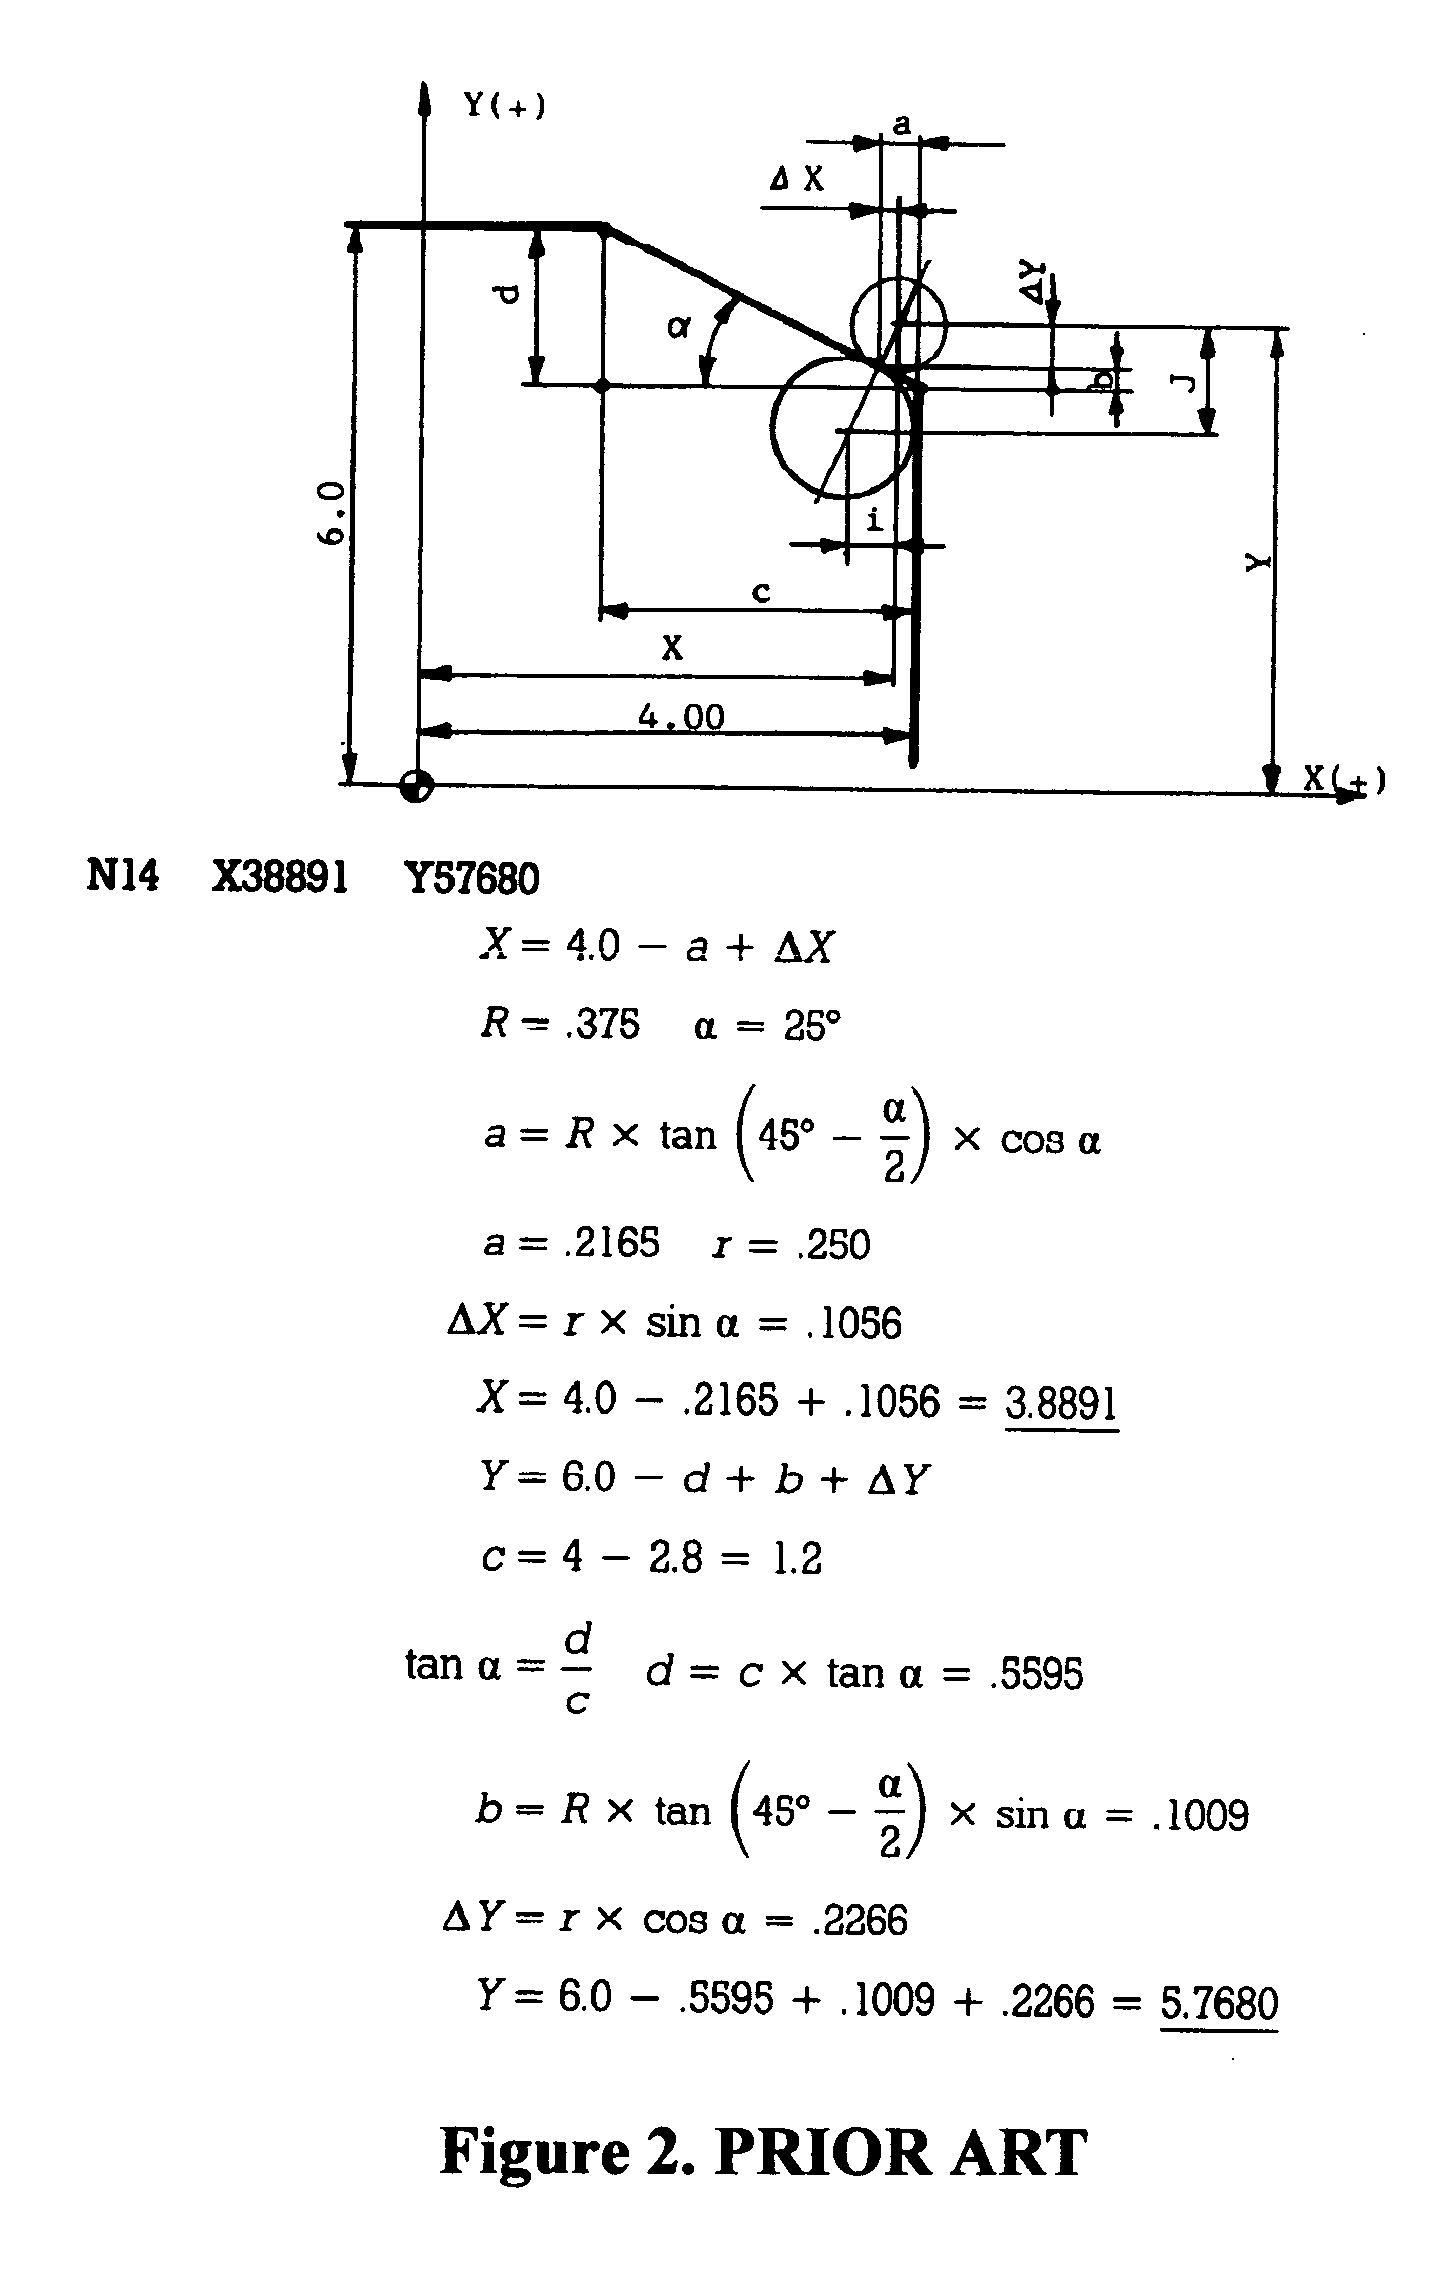 Methods and systems for producing numerical control program files for controlling machine tools